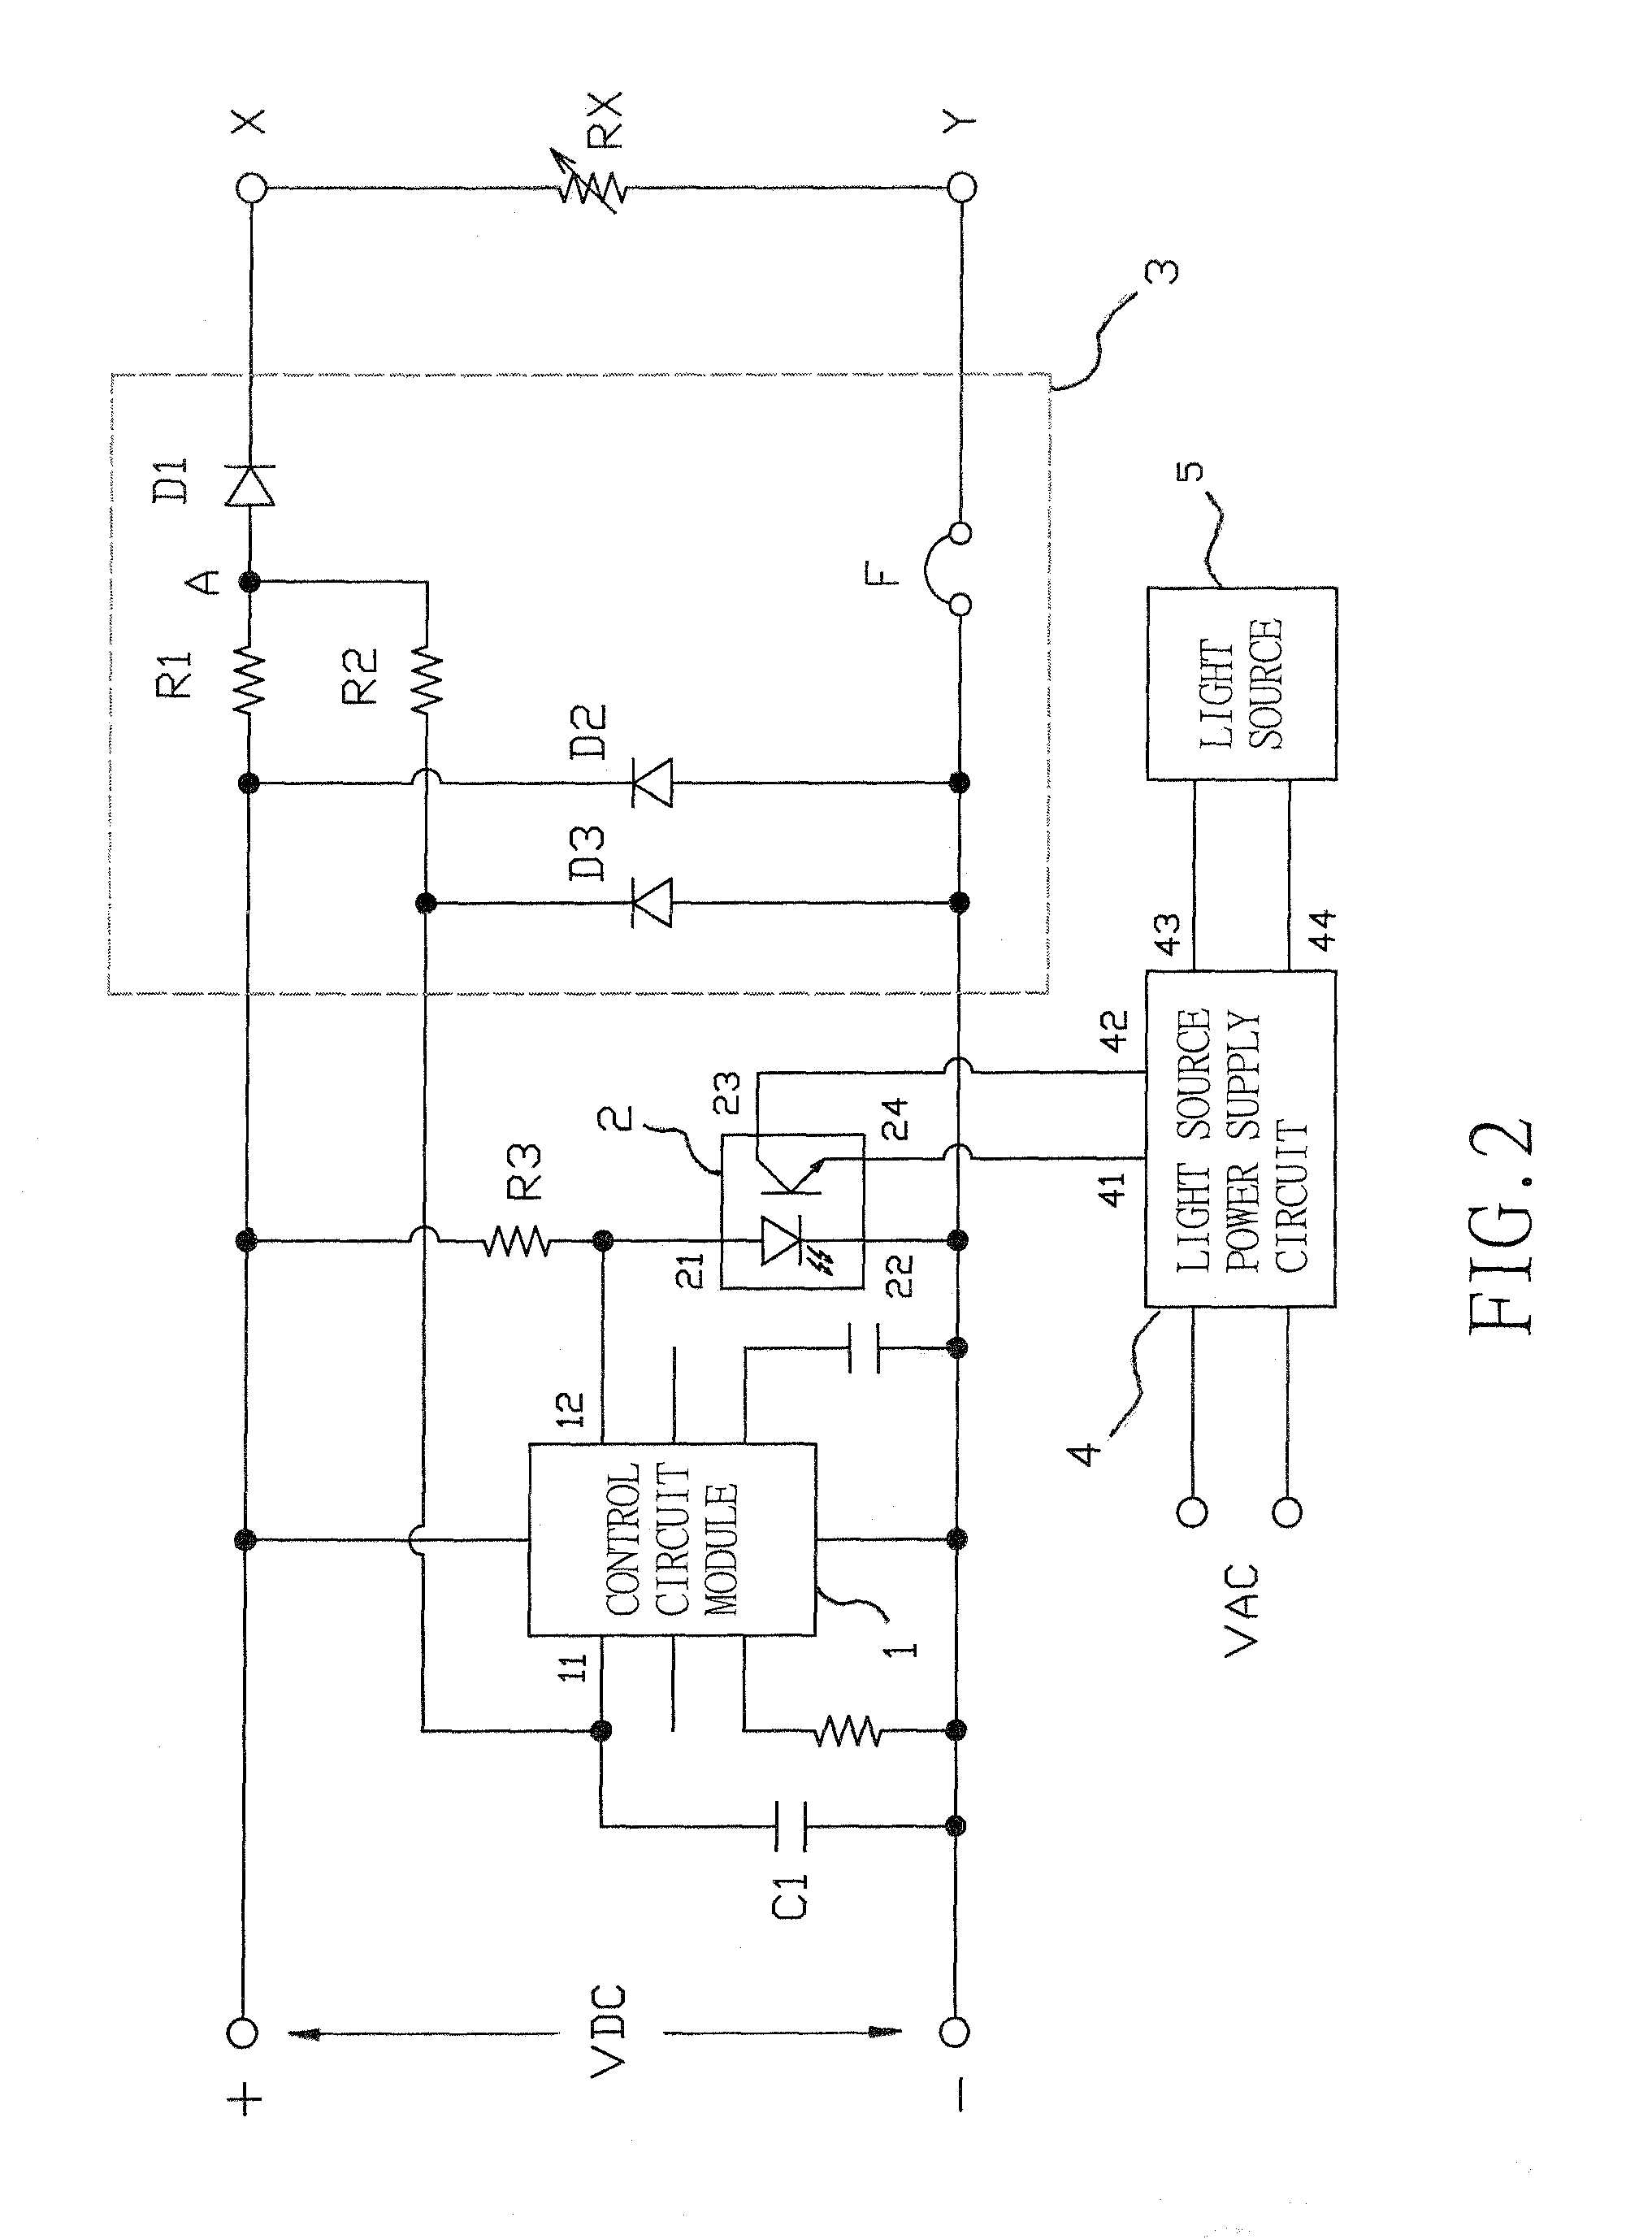 Isolation dimmer circuit structure